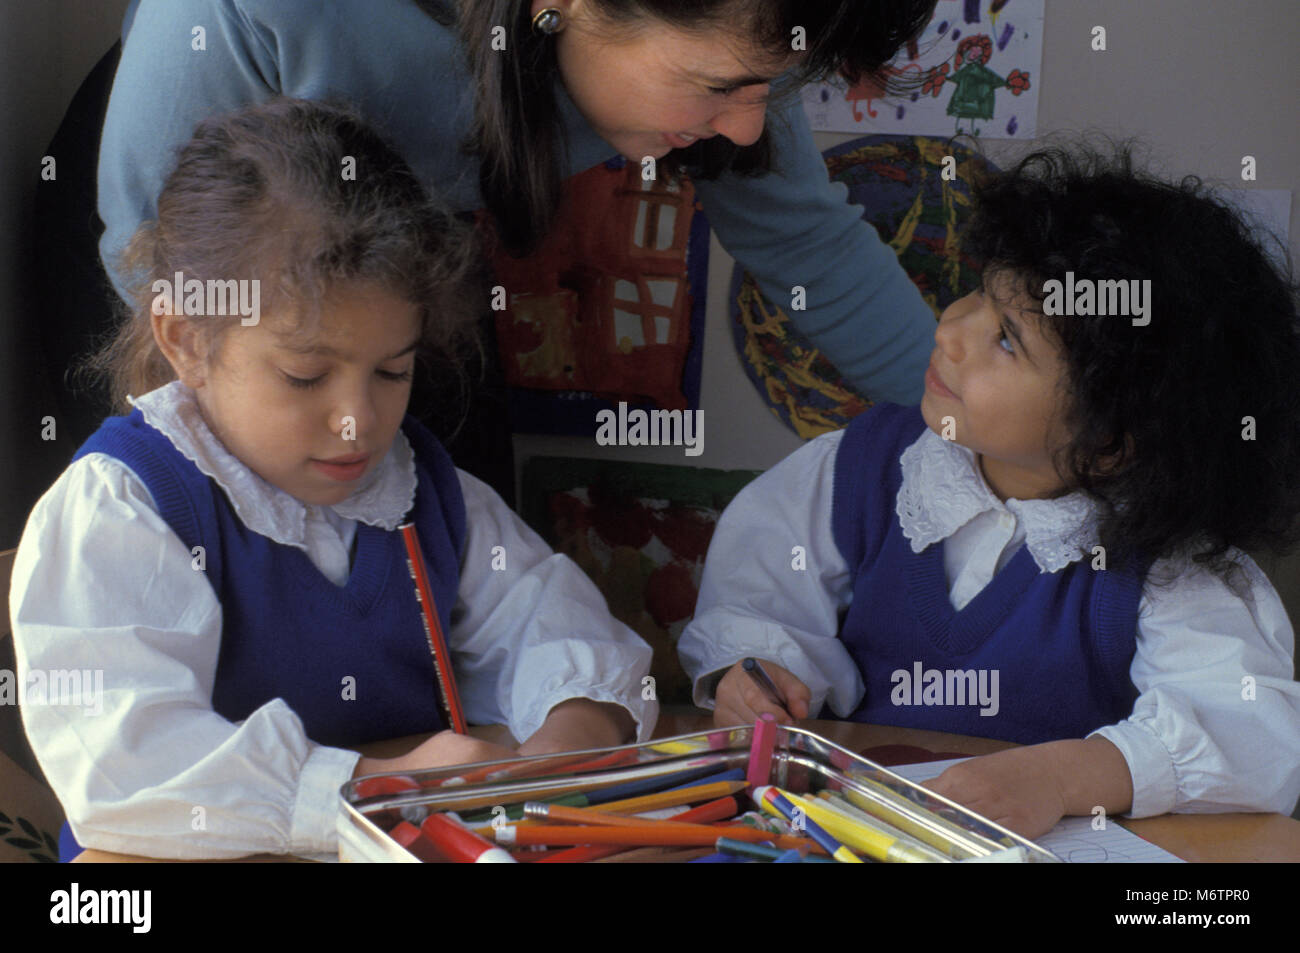 Two little girls with teacher or parent in classroom environment Stock Photo